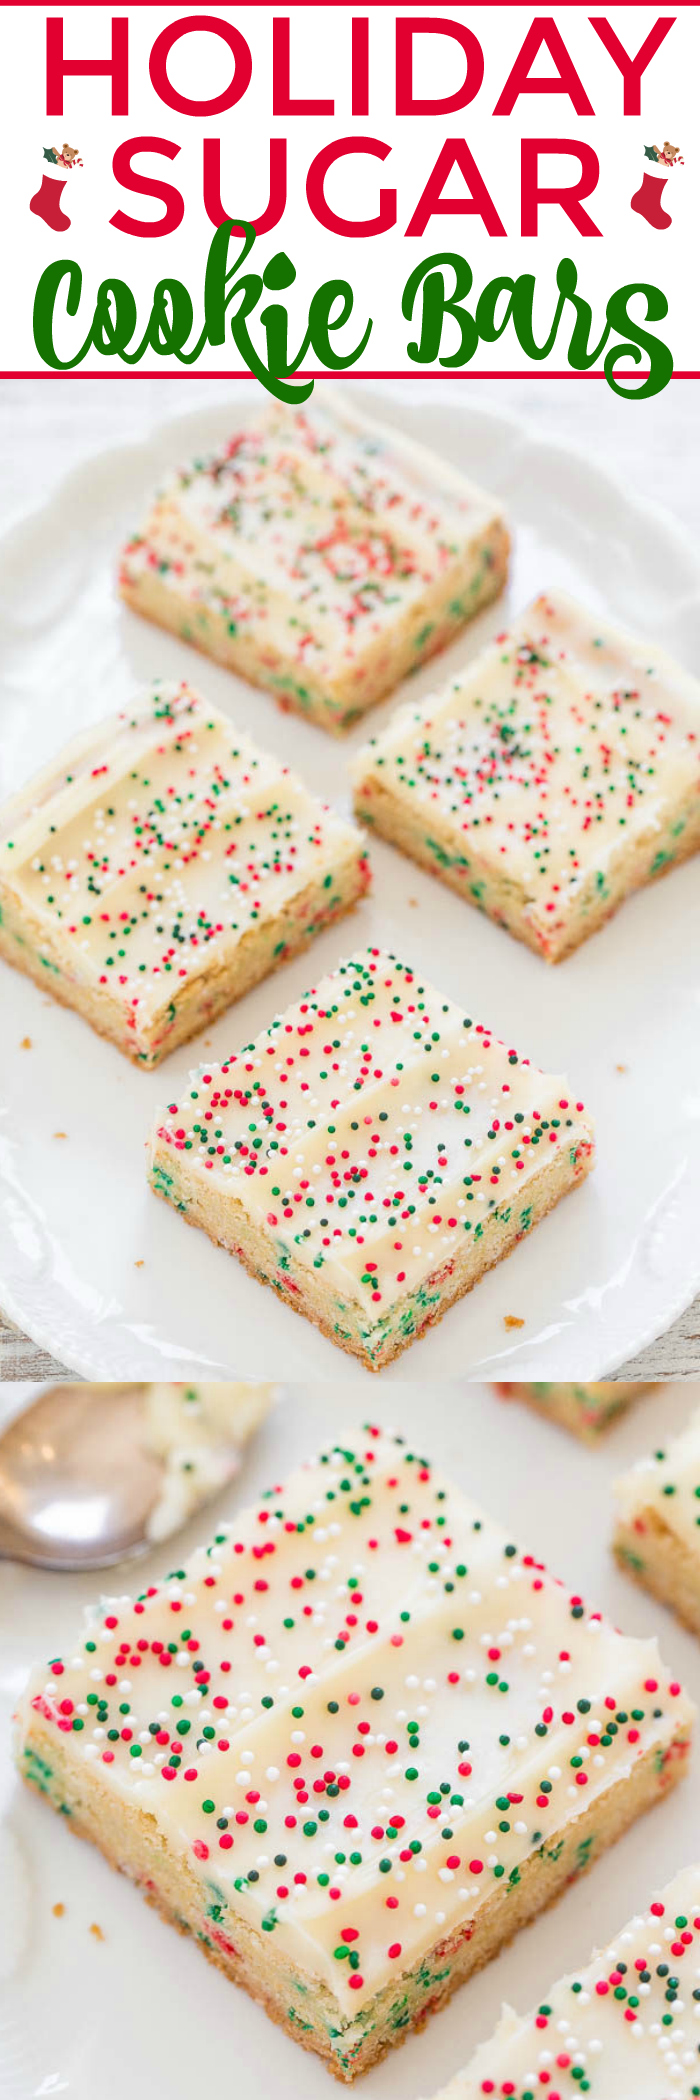 Holiday Sugar Cookie Bars with Cream Cheese Frosting - Sugar cookies in bar form with SPRINKLES baked in and on top!! So much faster than making cookies and a great holiday baking SHORTCUT!!